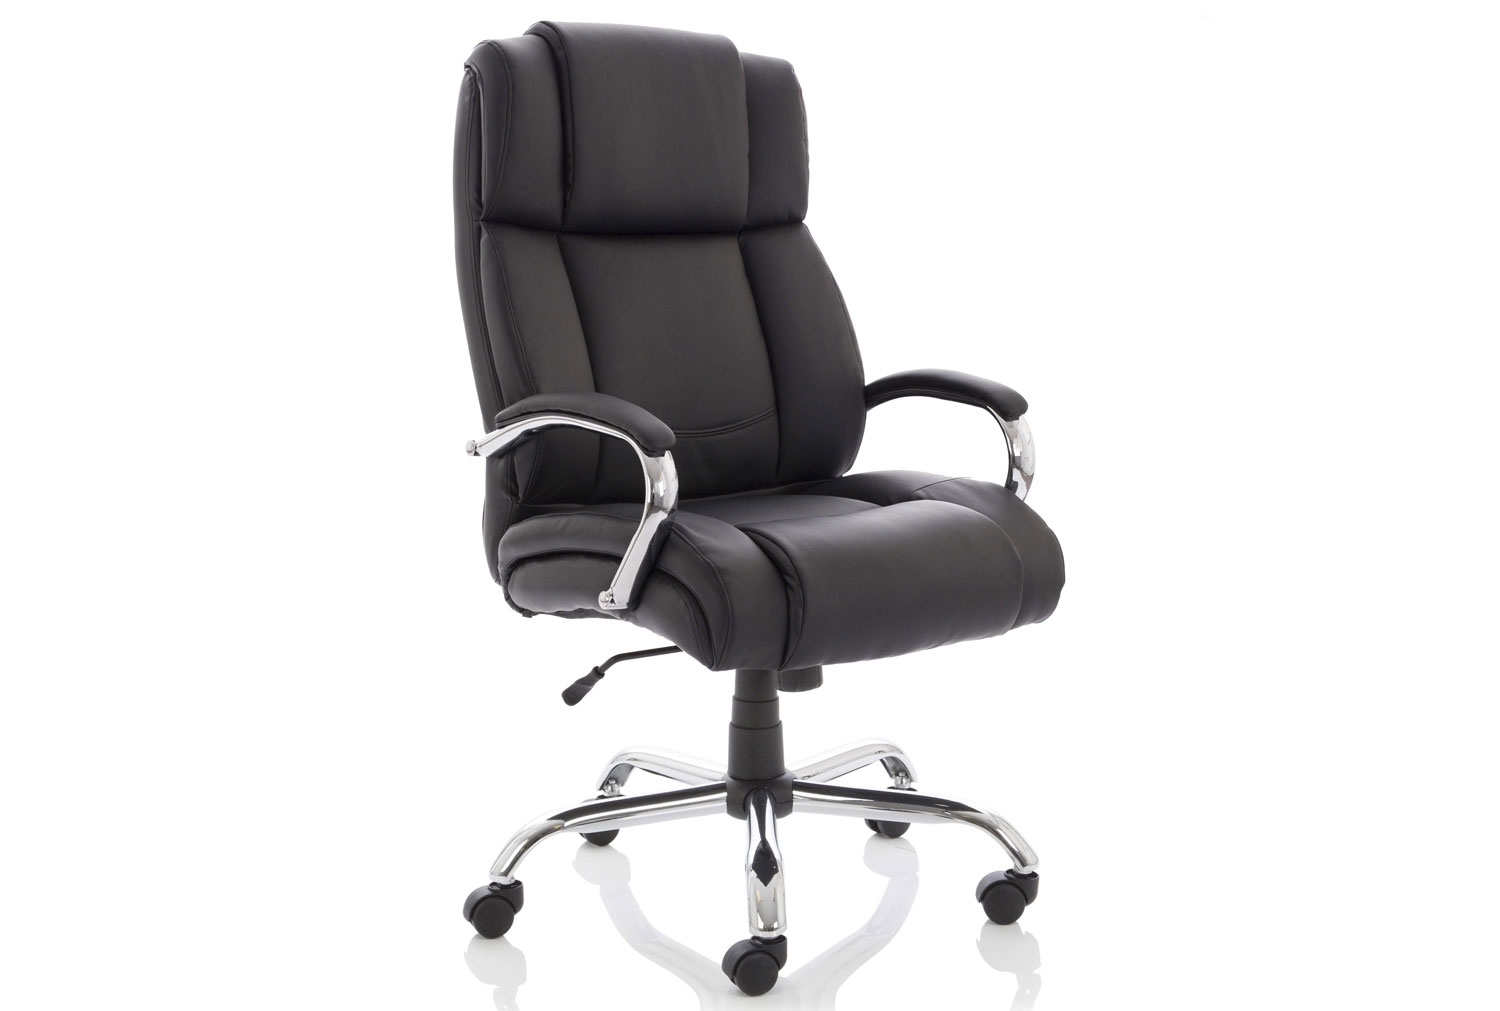 Levira Heavy Duty Bonded Leather Executive Office Chair, Express Delivery